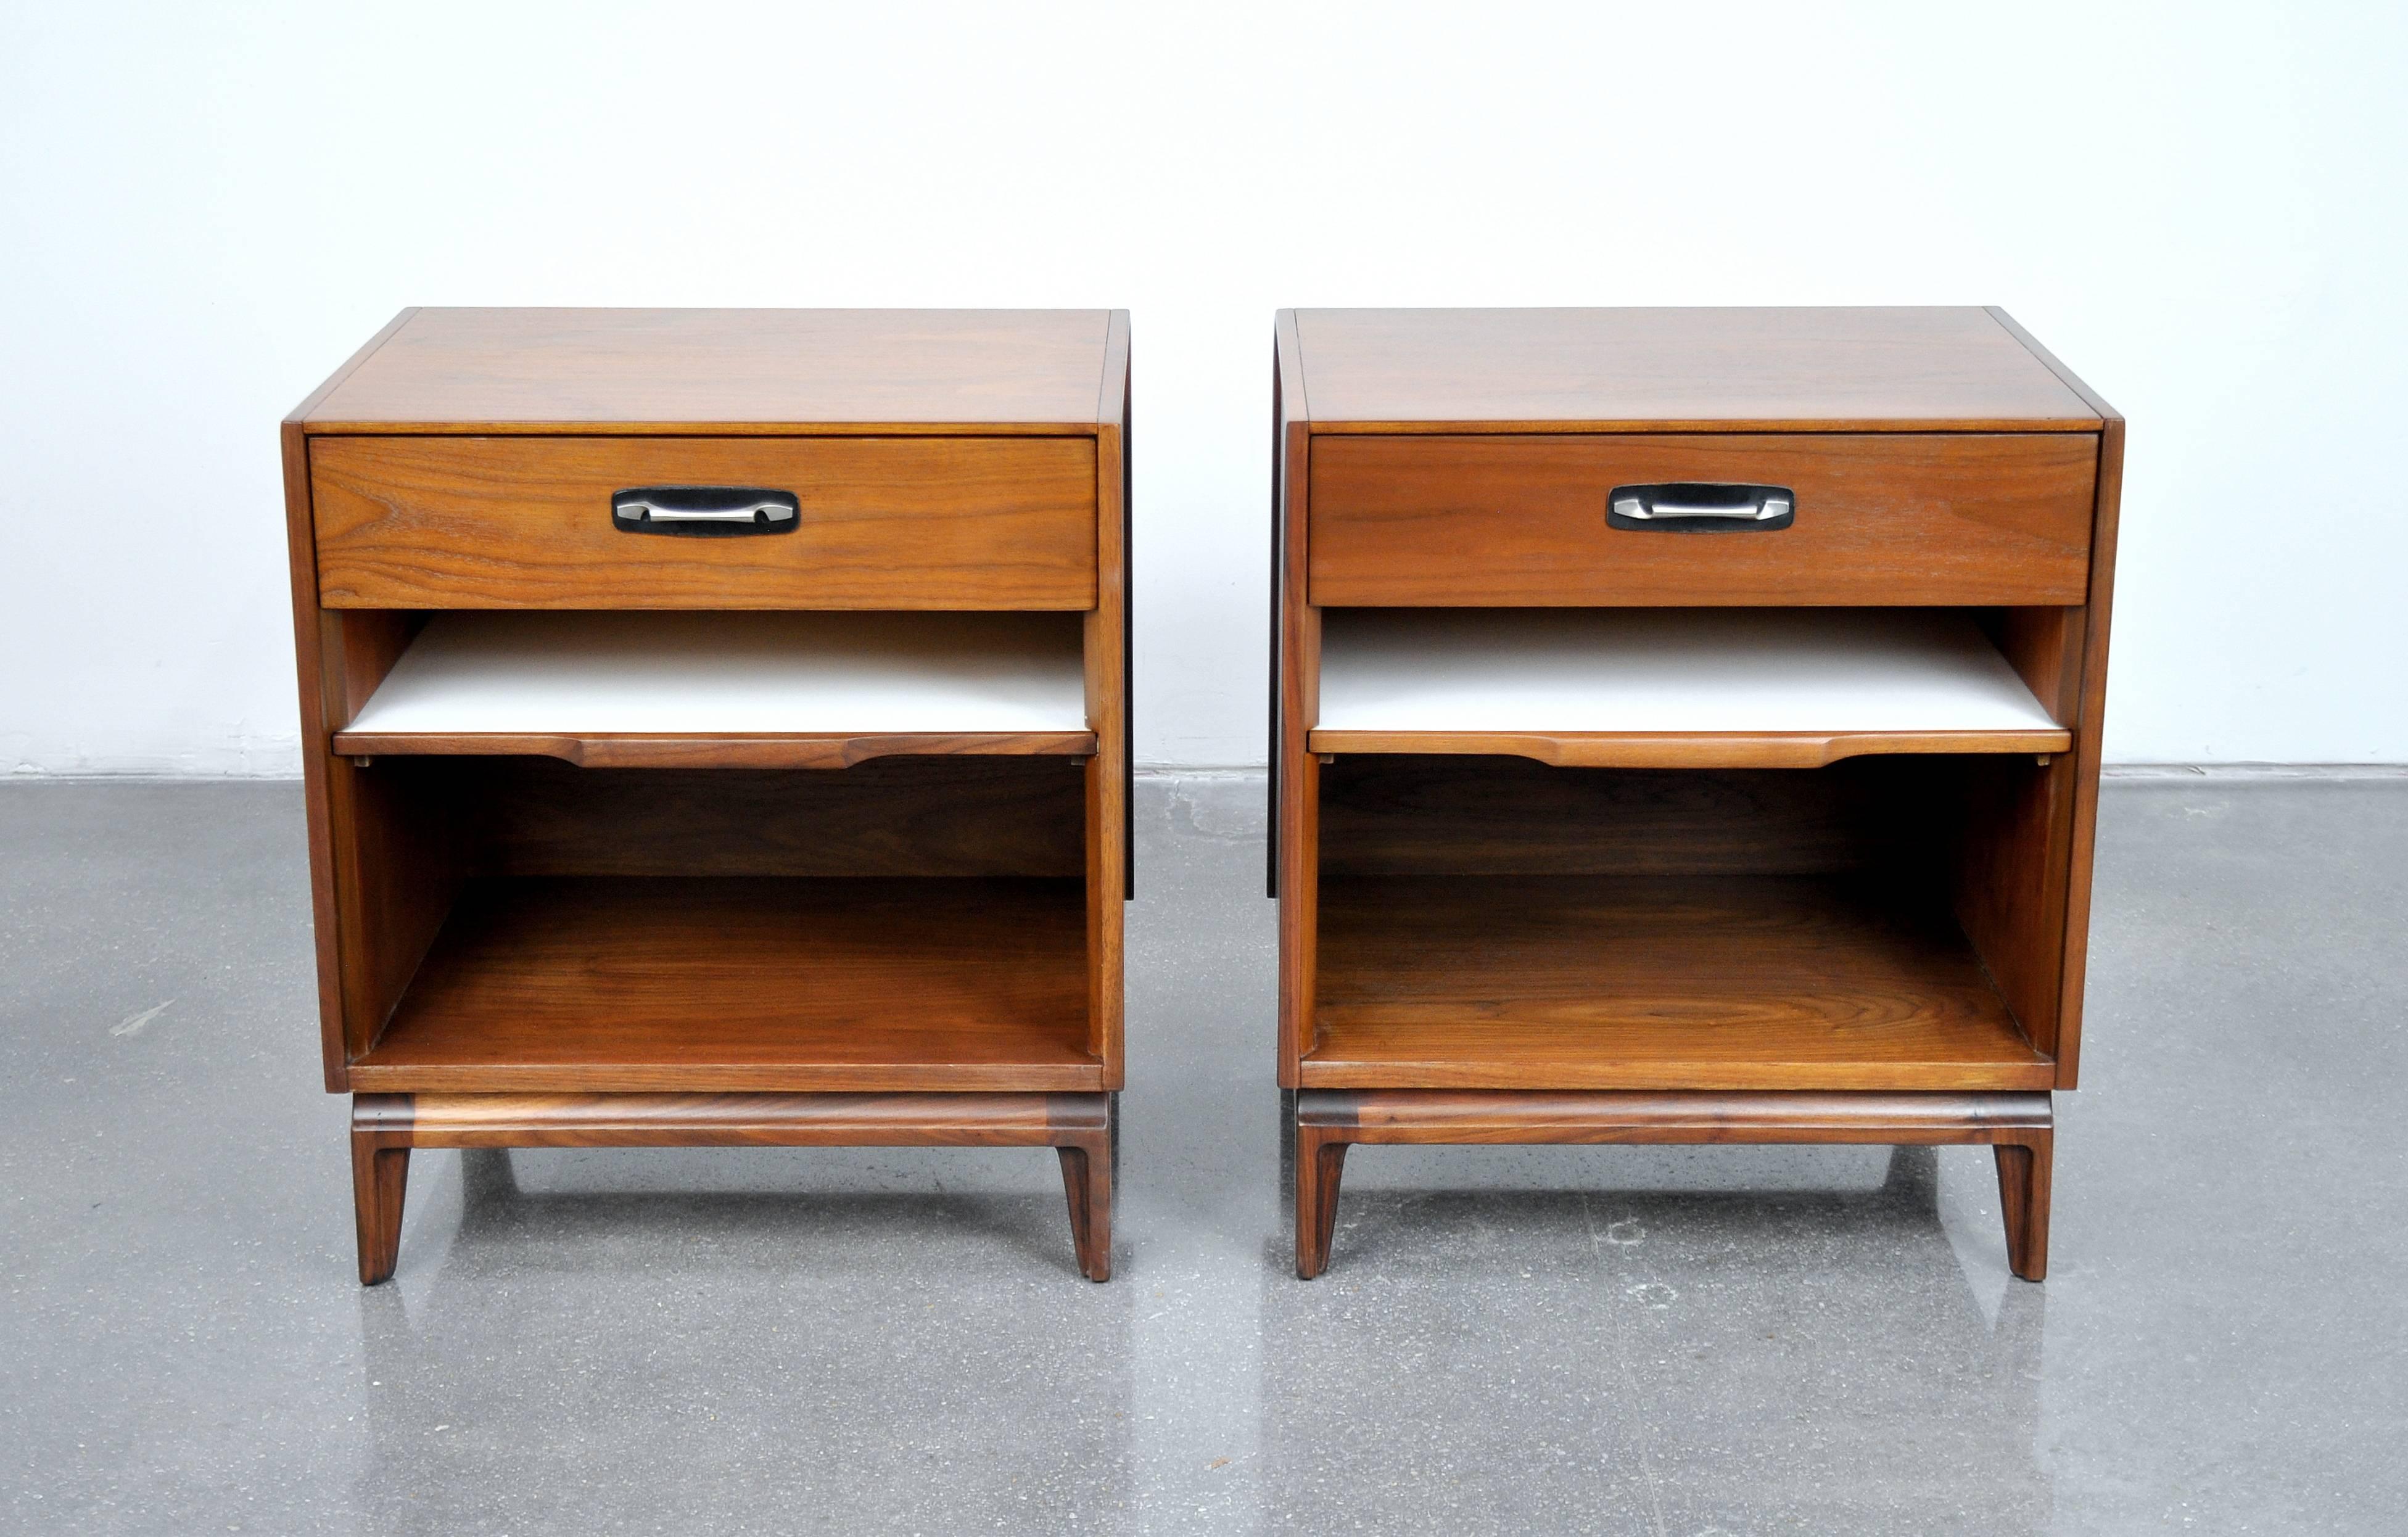 A vintage pair of Red Lion bedside tables, which could also be used as side or end tables, manufactured in the 1960s. Each table features a drawer with a black leather backed steel pull and a white slide out shelf, over an open cabinet space.